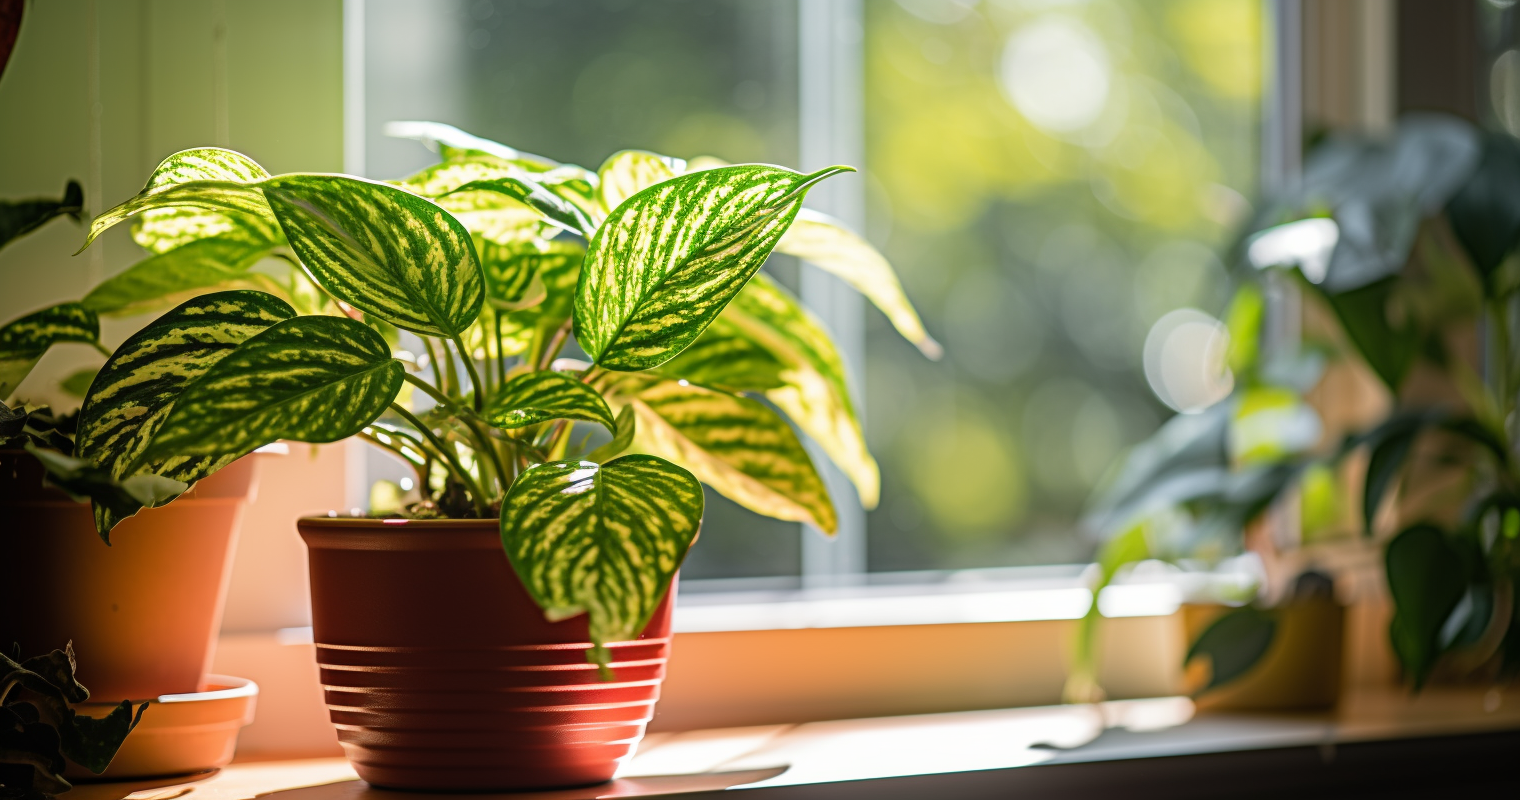 Sunlit Houseplant by the Window